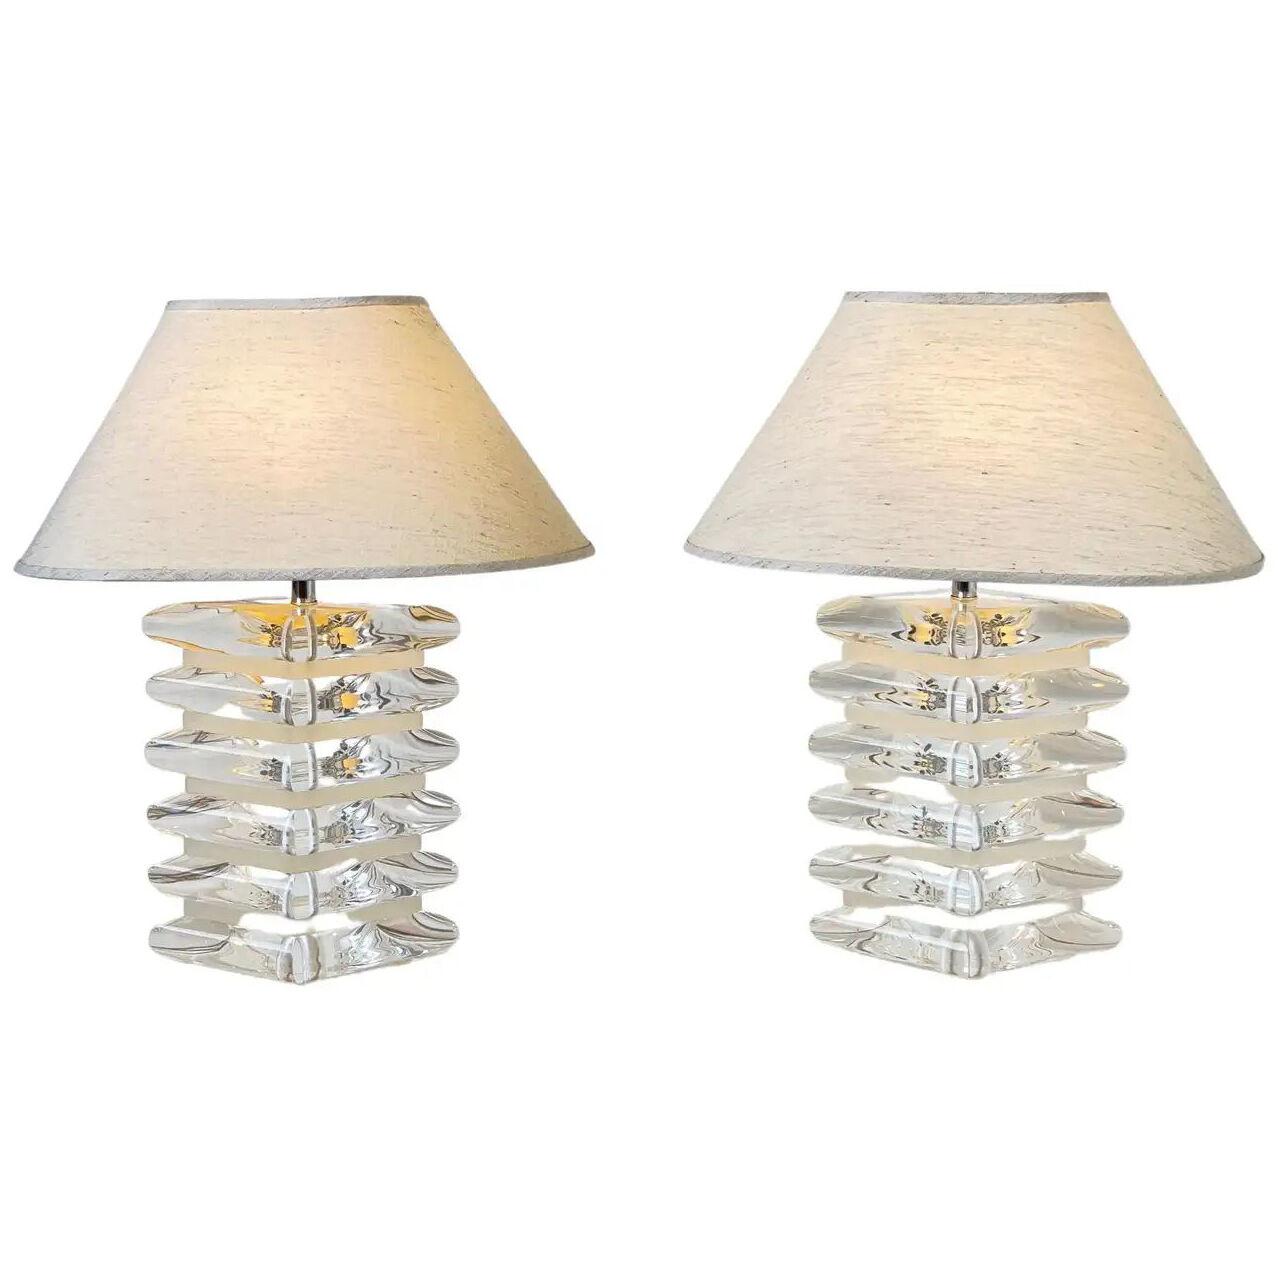 Pair of Diamond Shape Lucite and Chrome Table Lamps